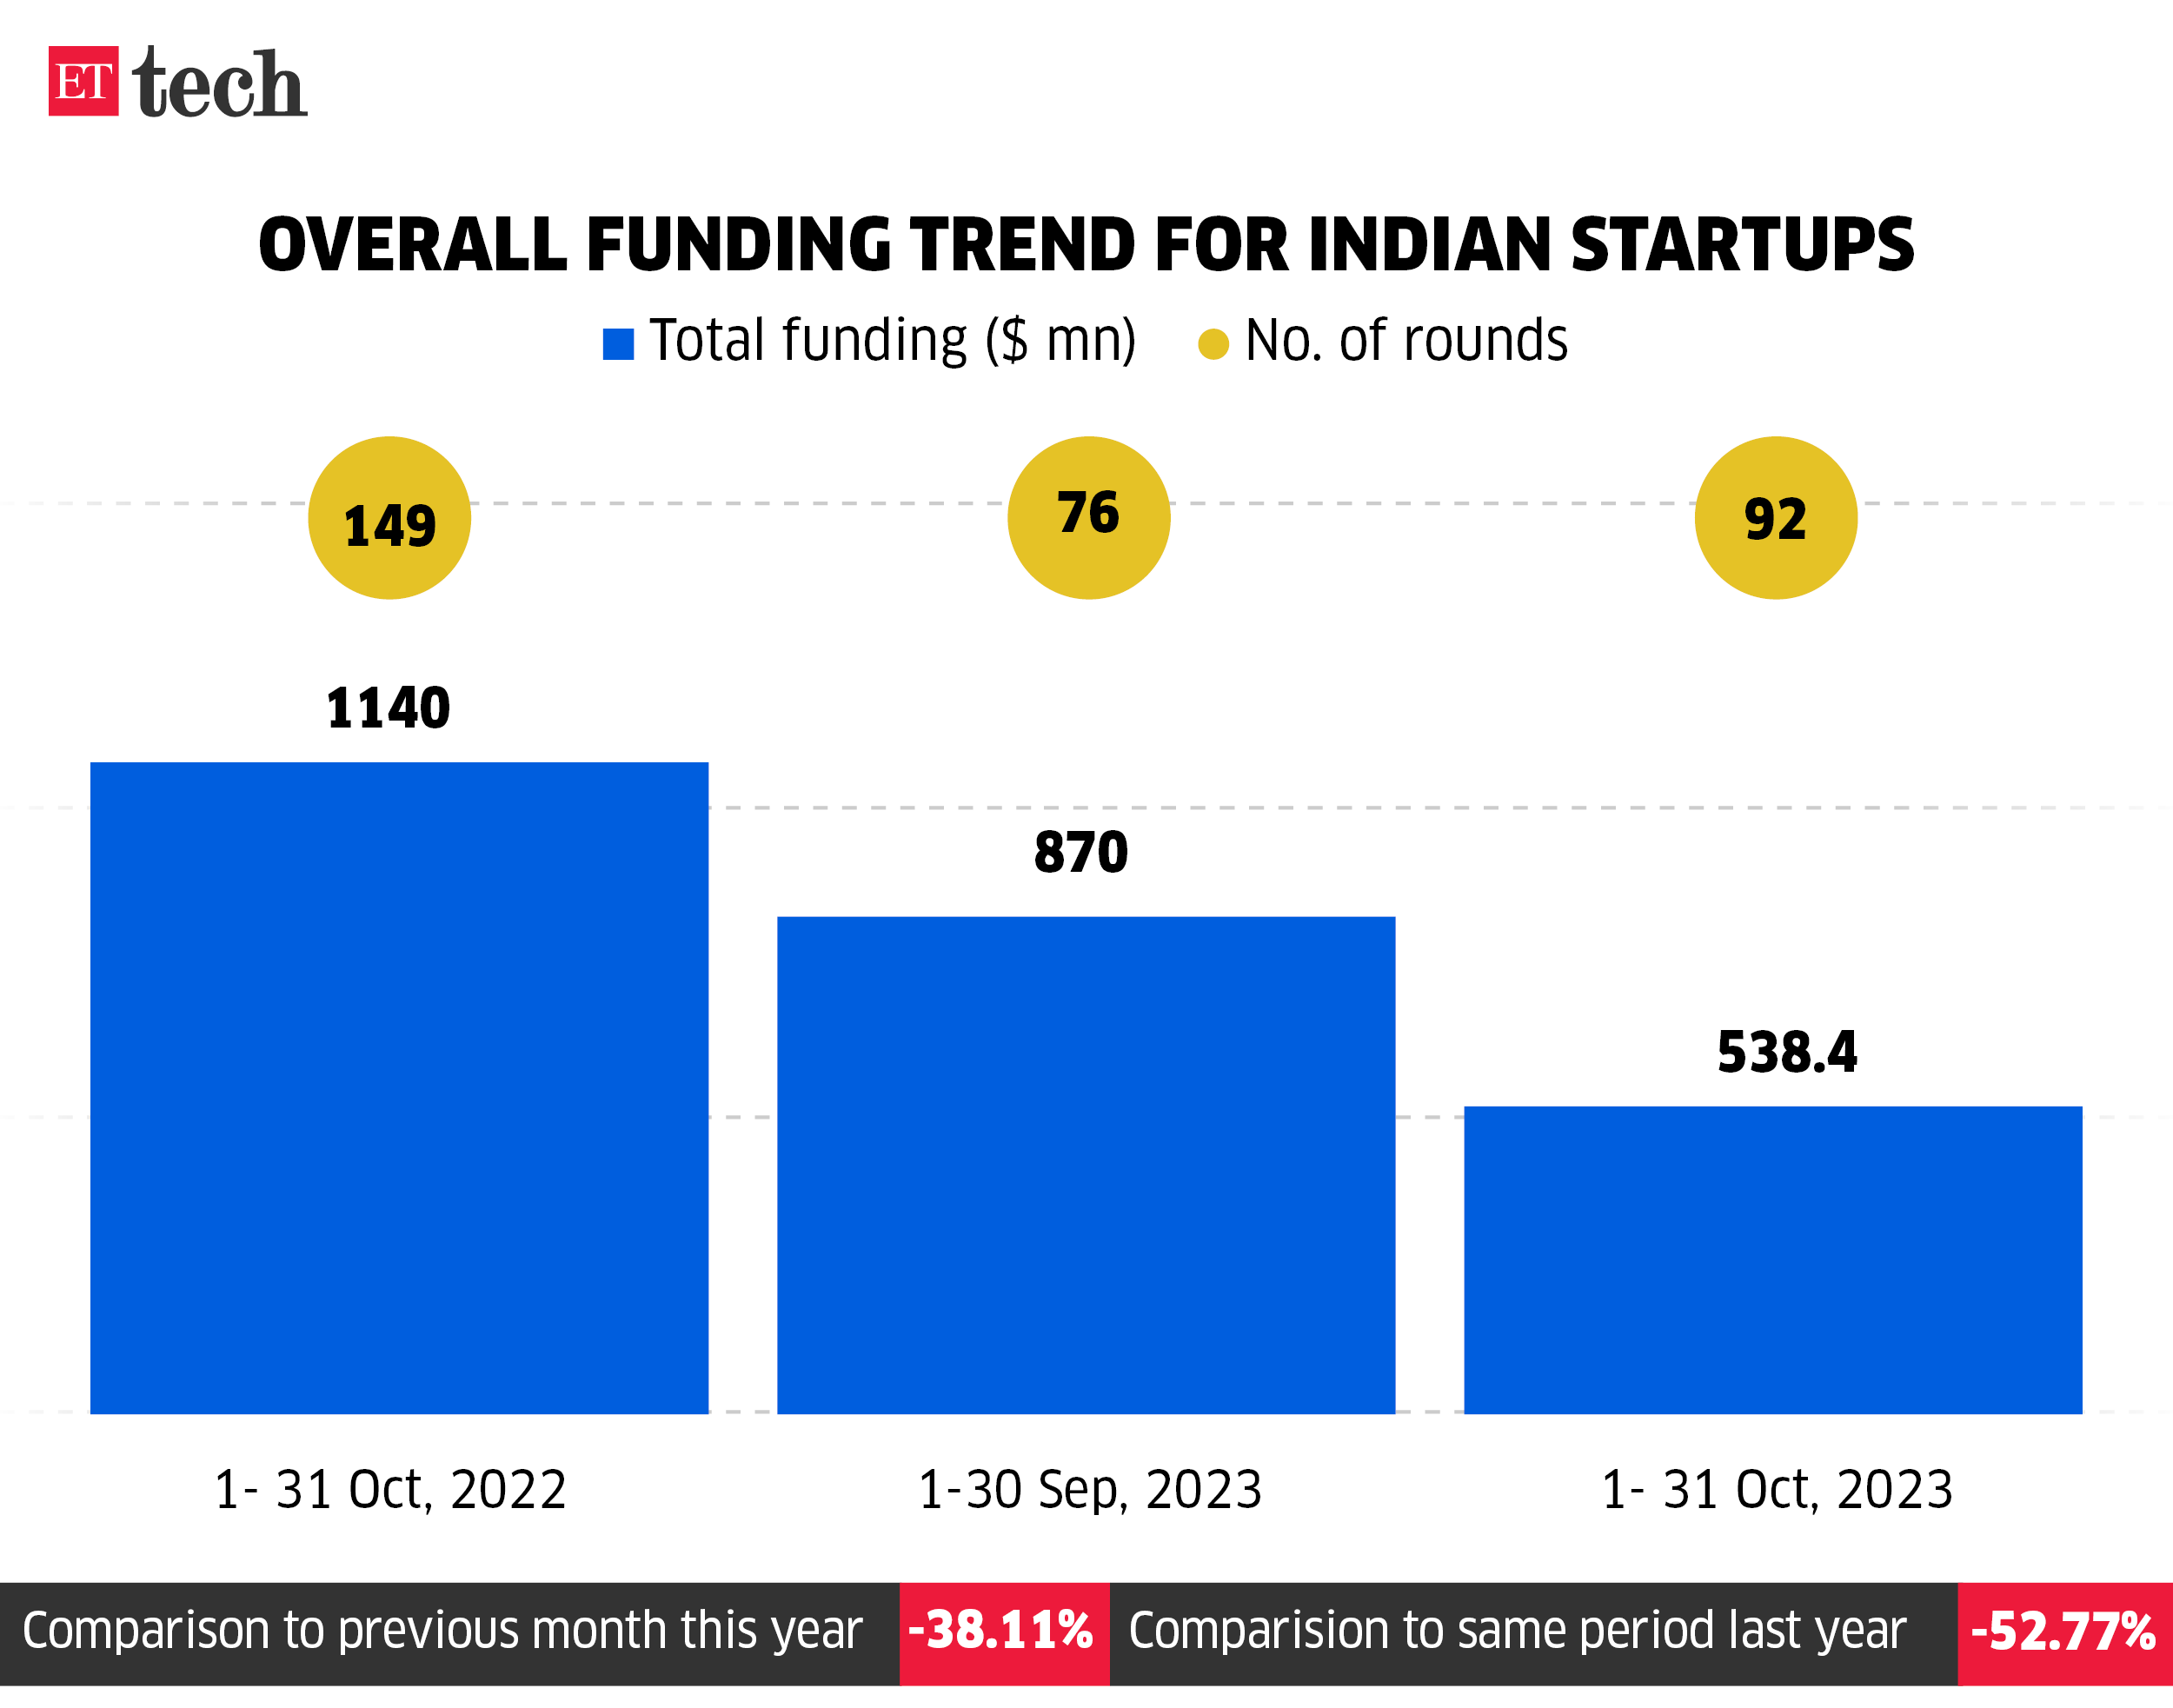 Overall funding trend for Indian startups_1- 31 Oct, 2023_ETTECH